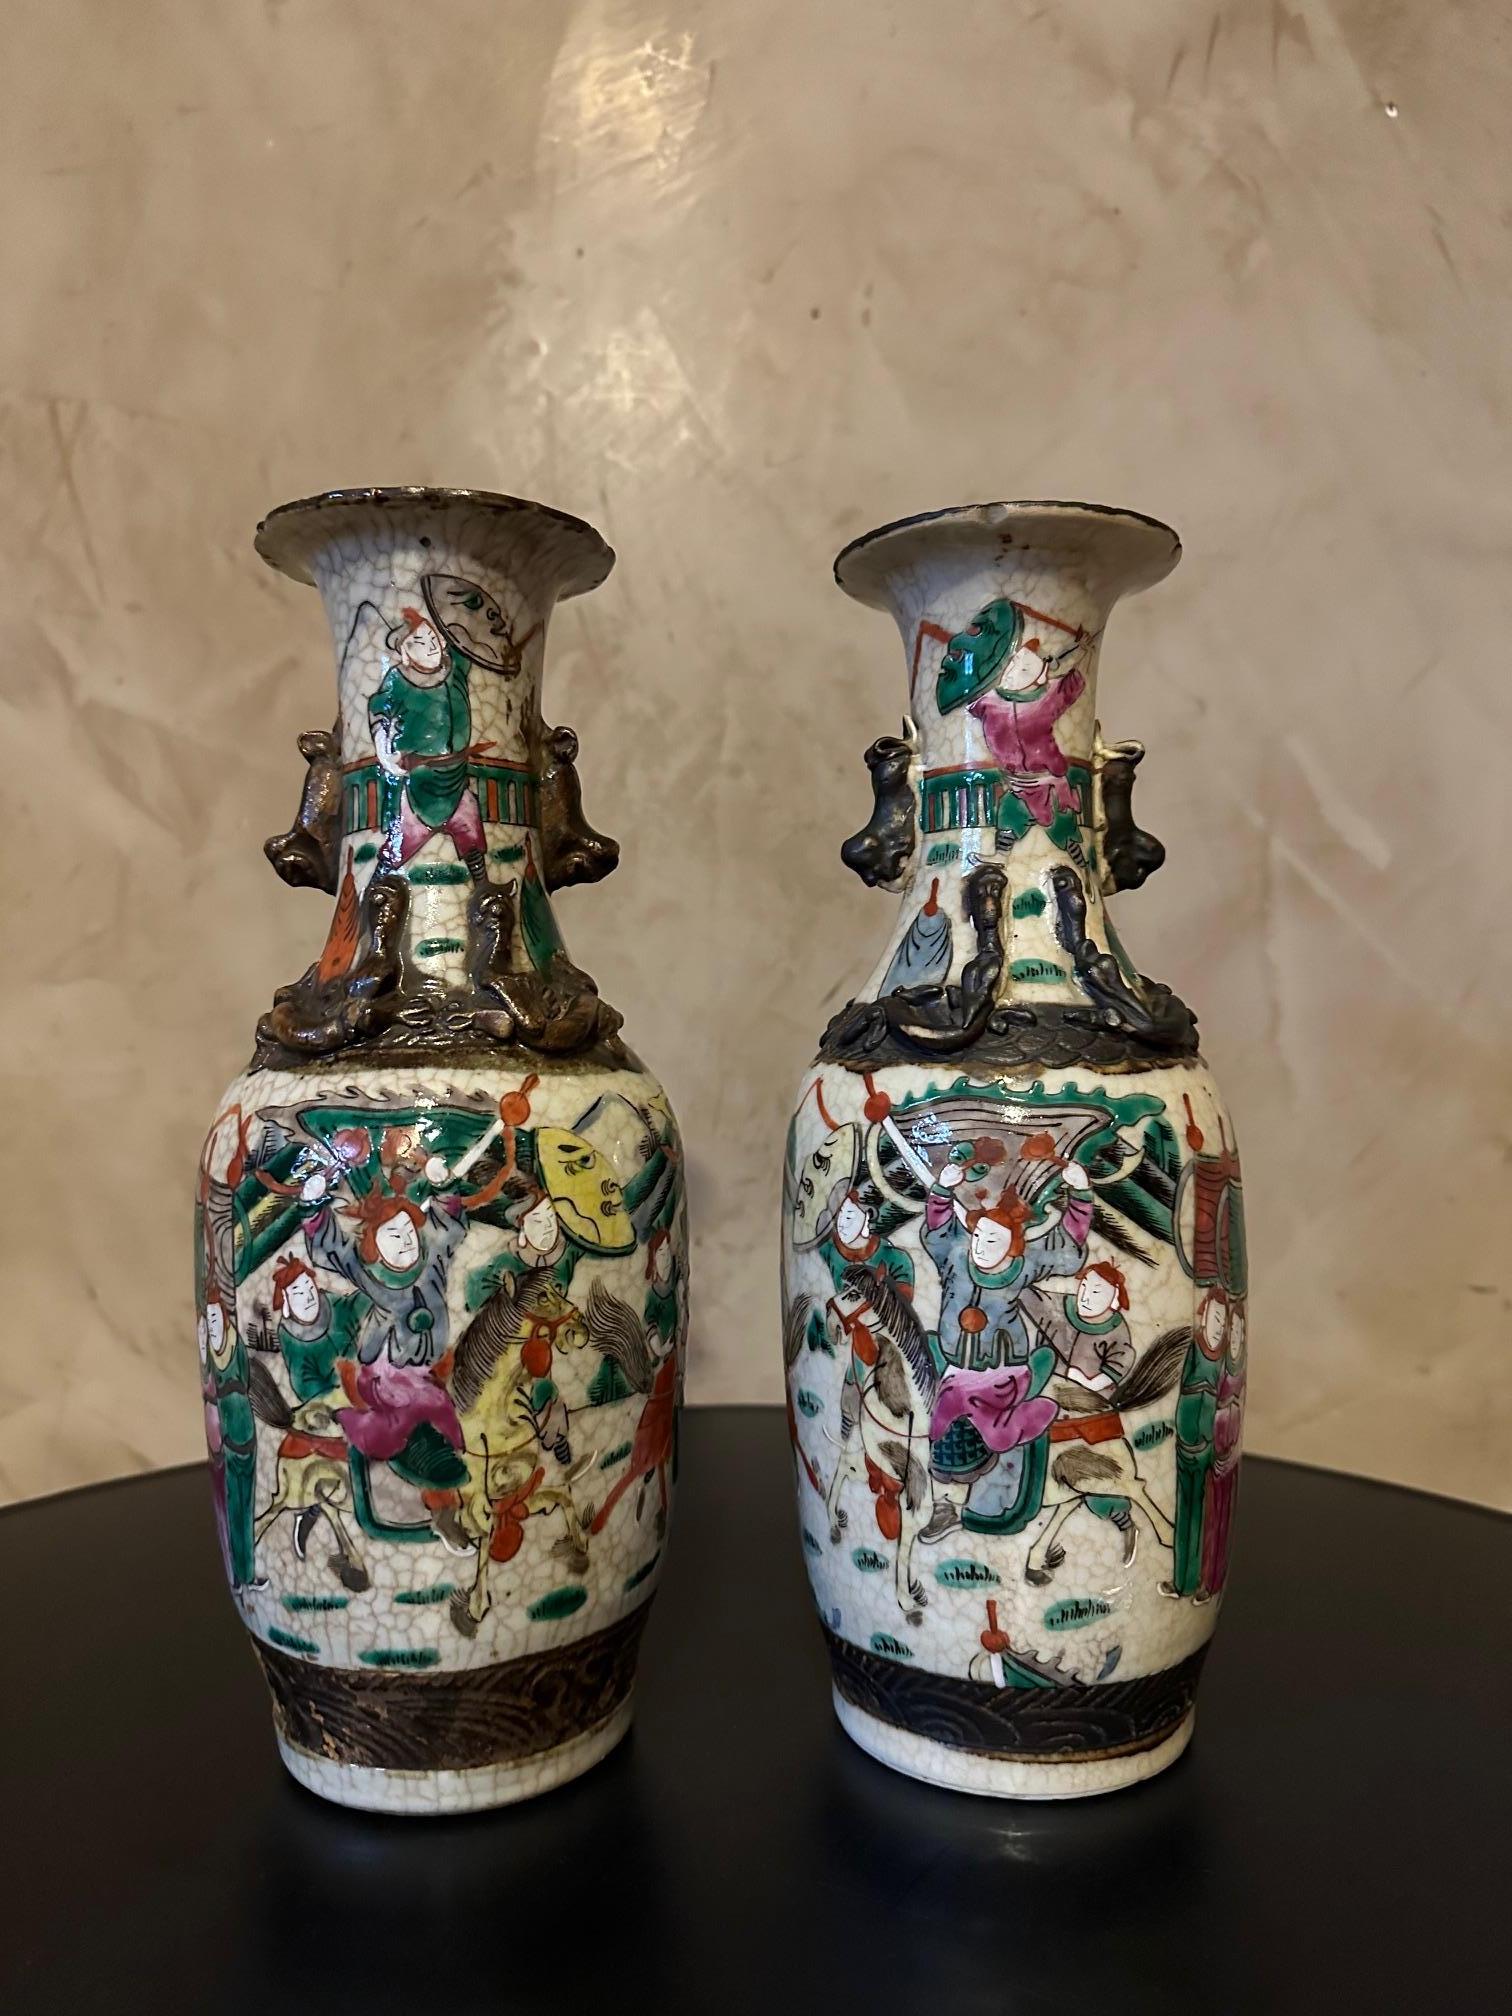 Very beautiful pair of 19th century Chinese vases in Nanjing porcelain. 
These vases feature a polychrome enameled decoration depicting battle scenes, soldiers armed with swords and spears. 
The edges are decorated with a collar decorated with